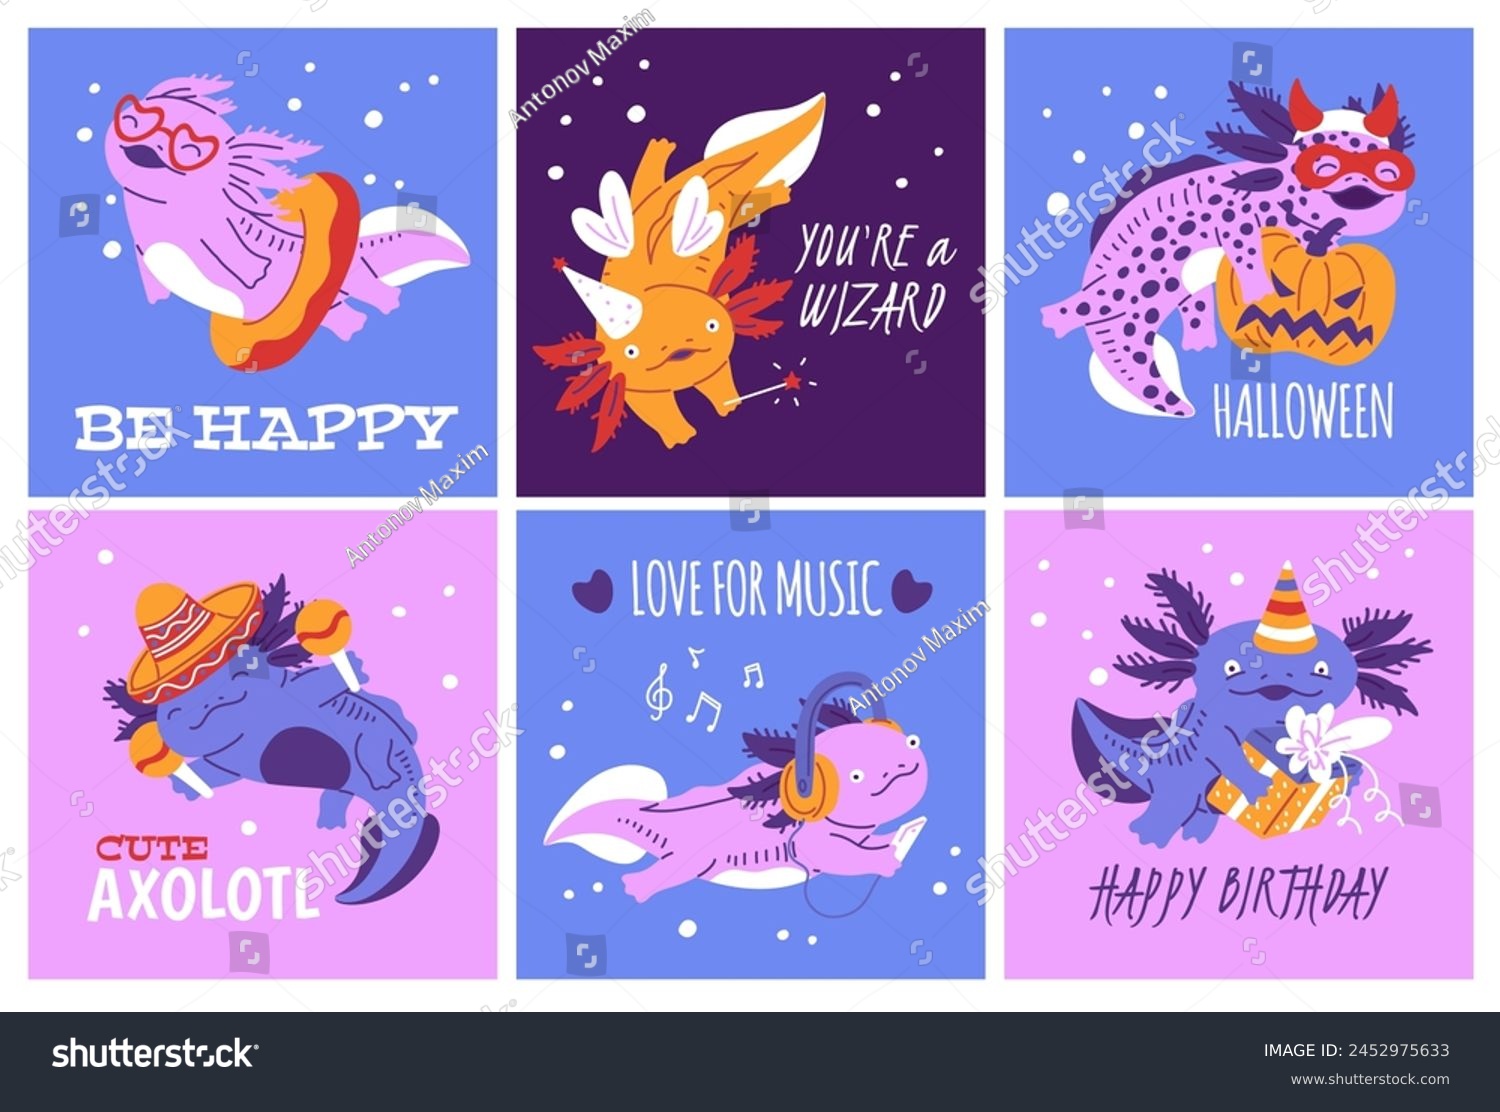 SVG of Cute cards for various occasions and holidays with funny axolotl salamander, cartoon flat vector illustration. Birthday and holiday prints and banners with axolotl. svg